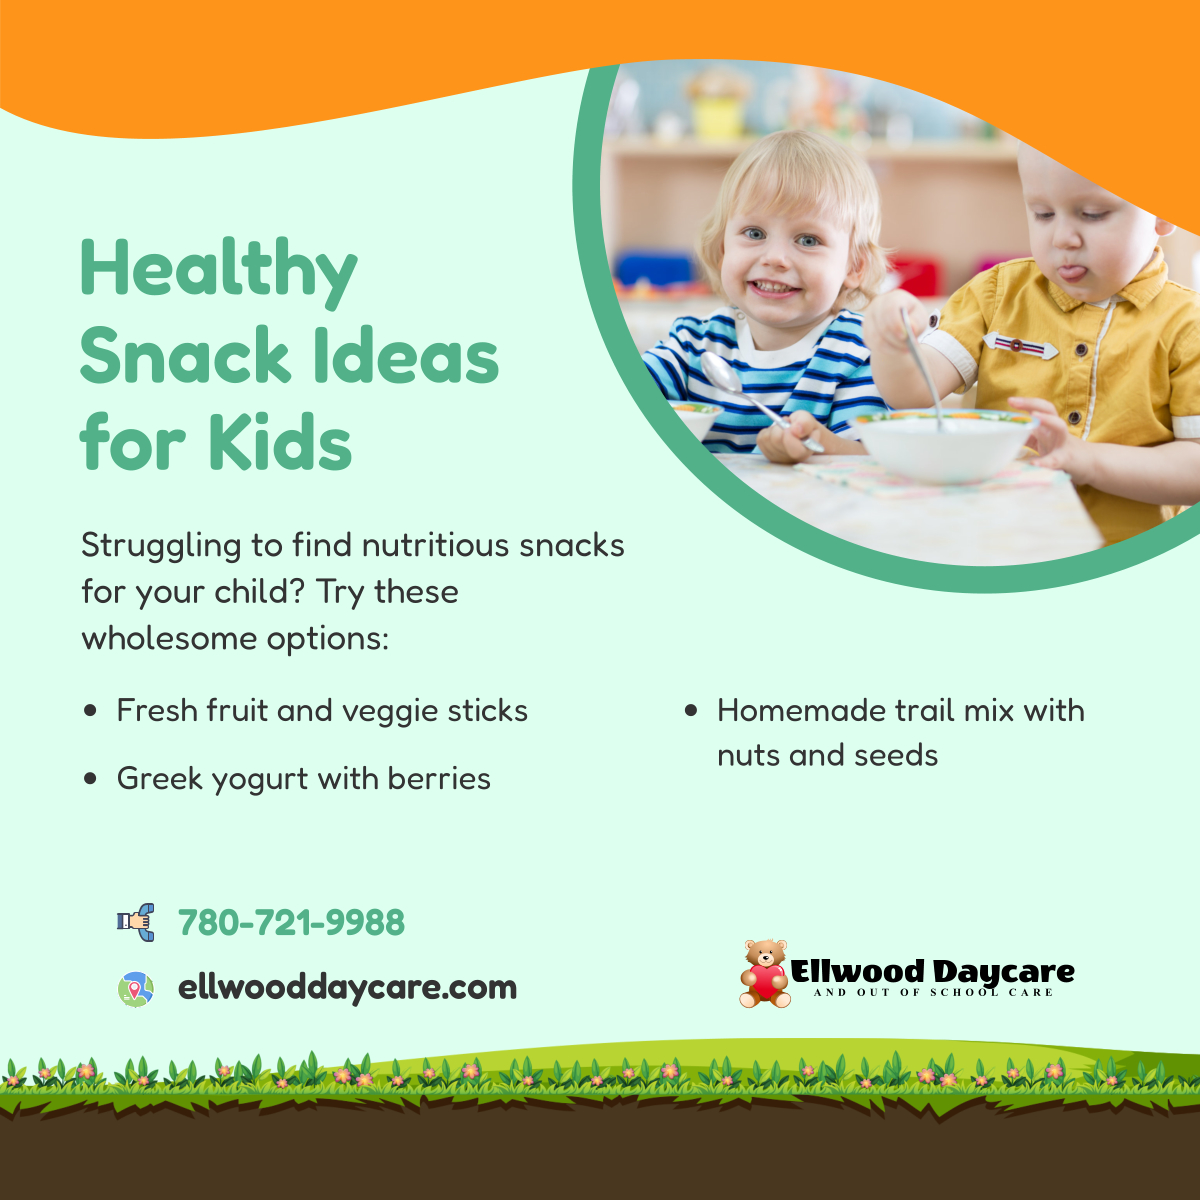 Keep your little ones fueled and satisfied with these delicious and nutritious snack ideas. Say goodbye to junk food cravings and hello to healthy habits! 

#DayCare #KidsSnacks #EdmontonAB